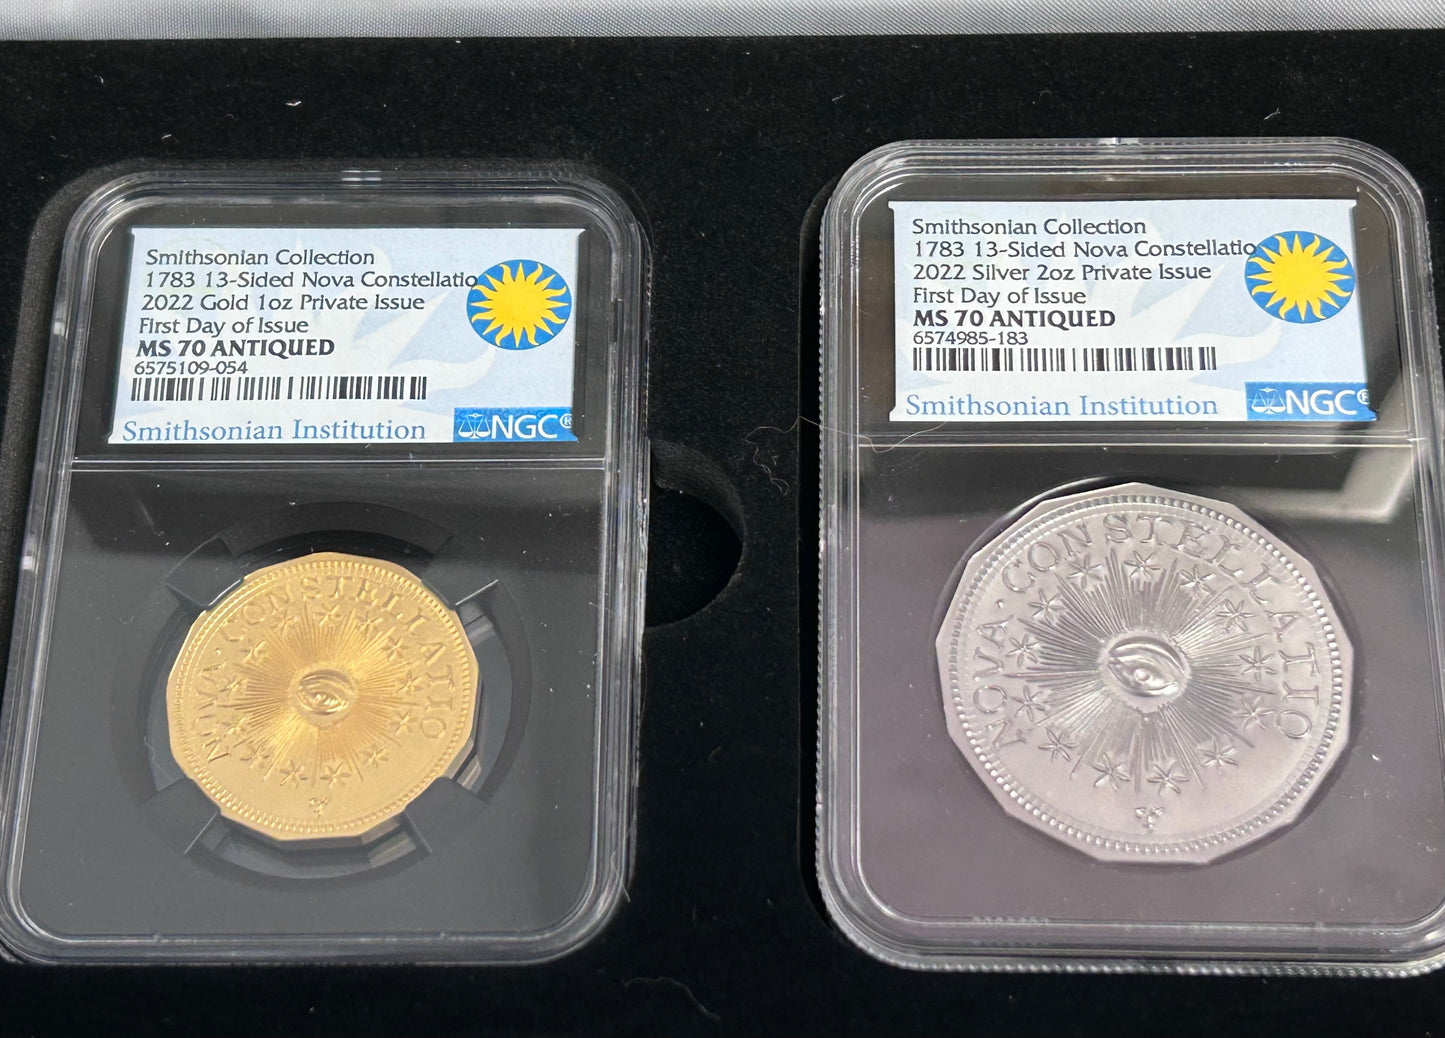 1783 Gold Silver 13-Sided Nova Constellatio 2-pc Set NGC MS70 First Day of Issue Smithsonian Label